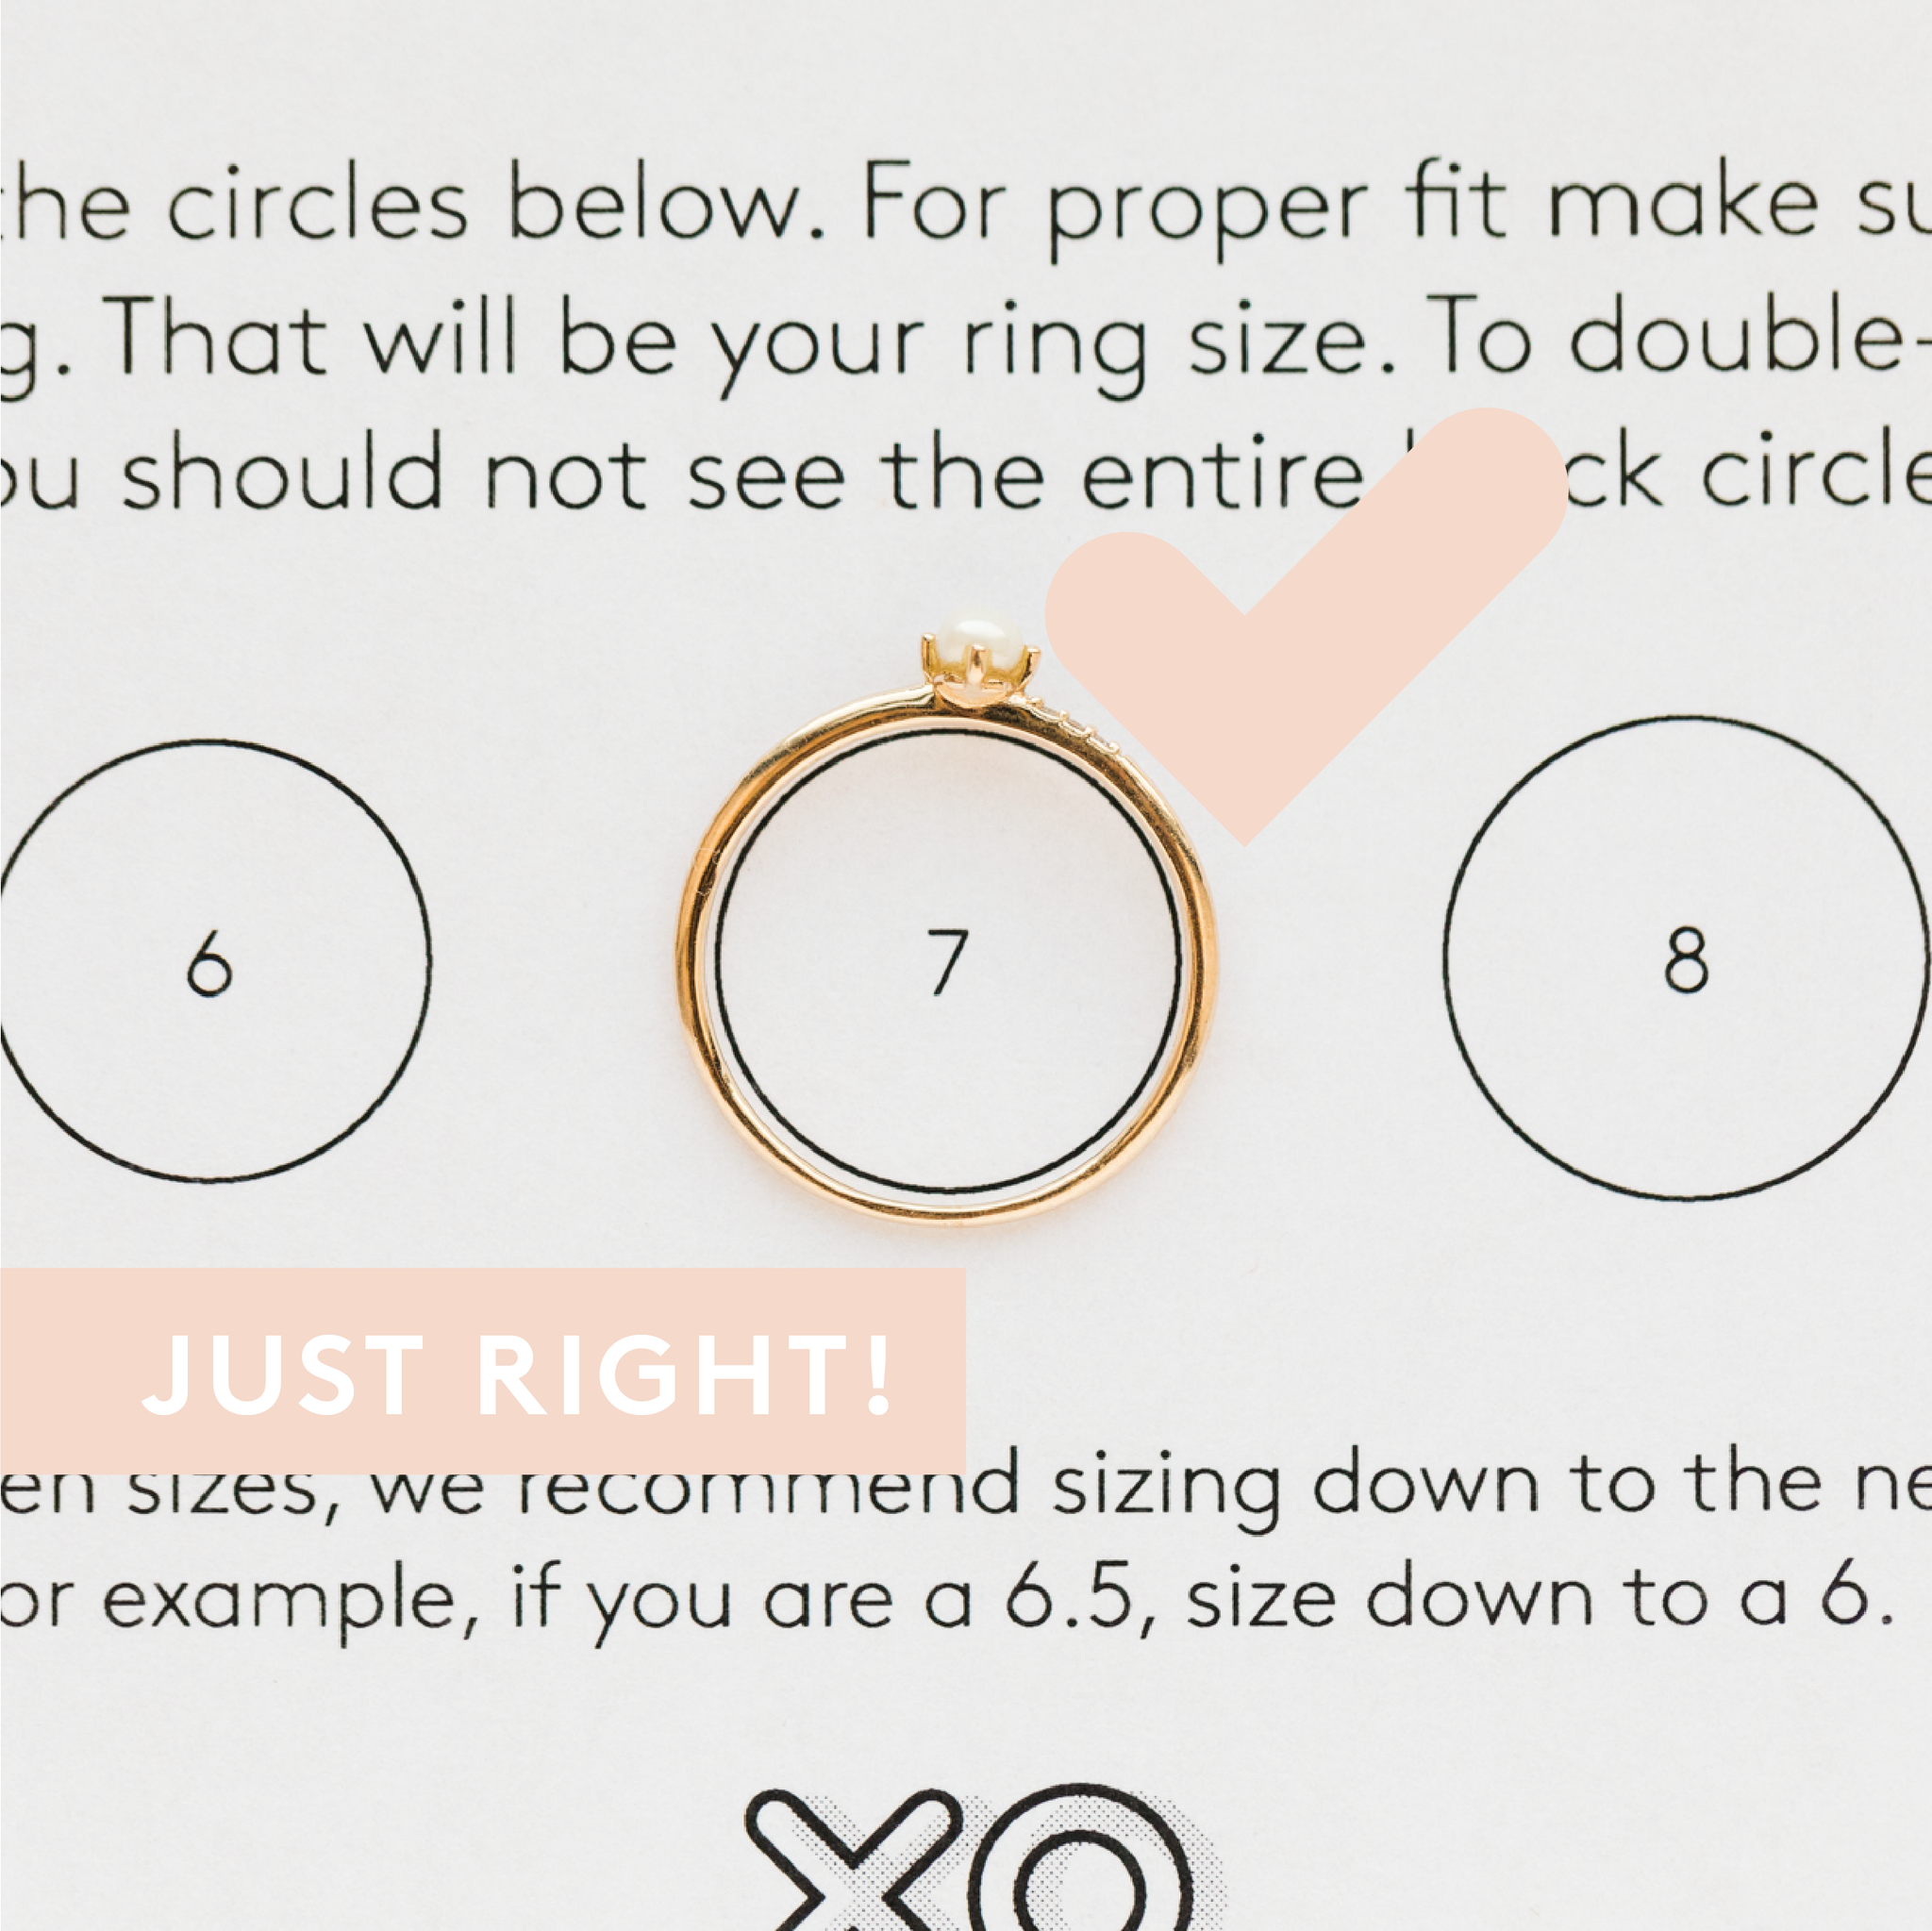 ring-size-chart-how-to-measure-ring-size-online-american-ring-size